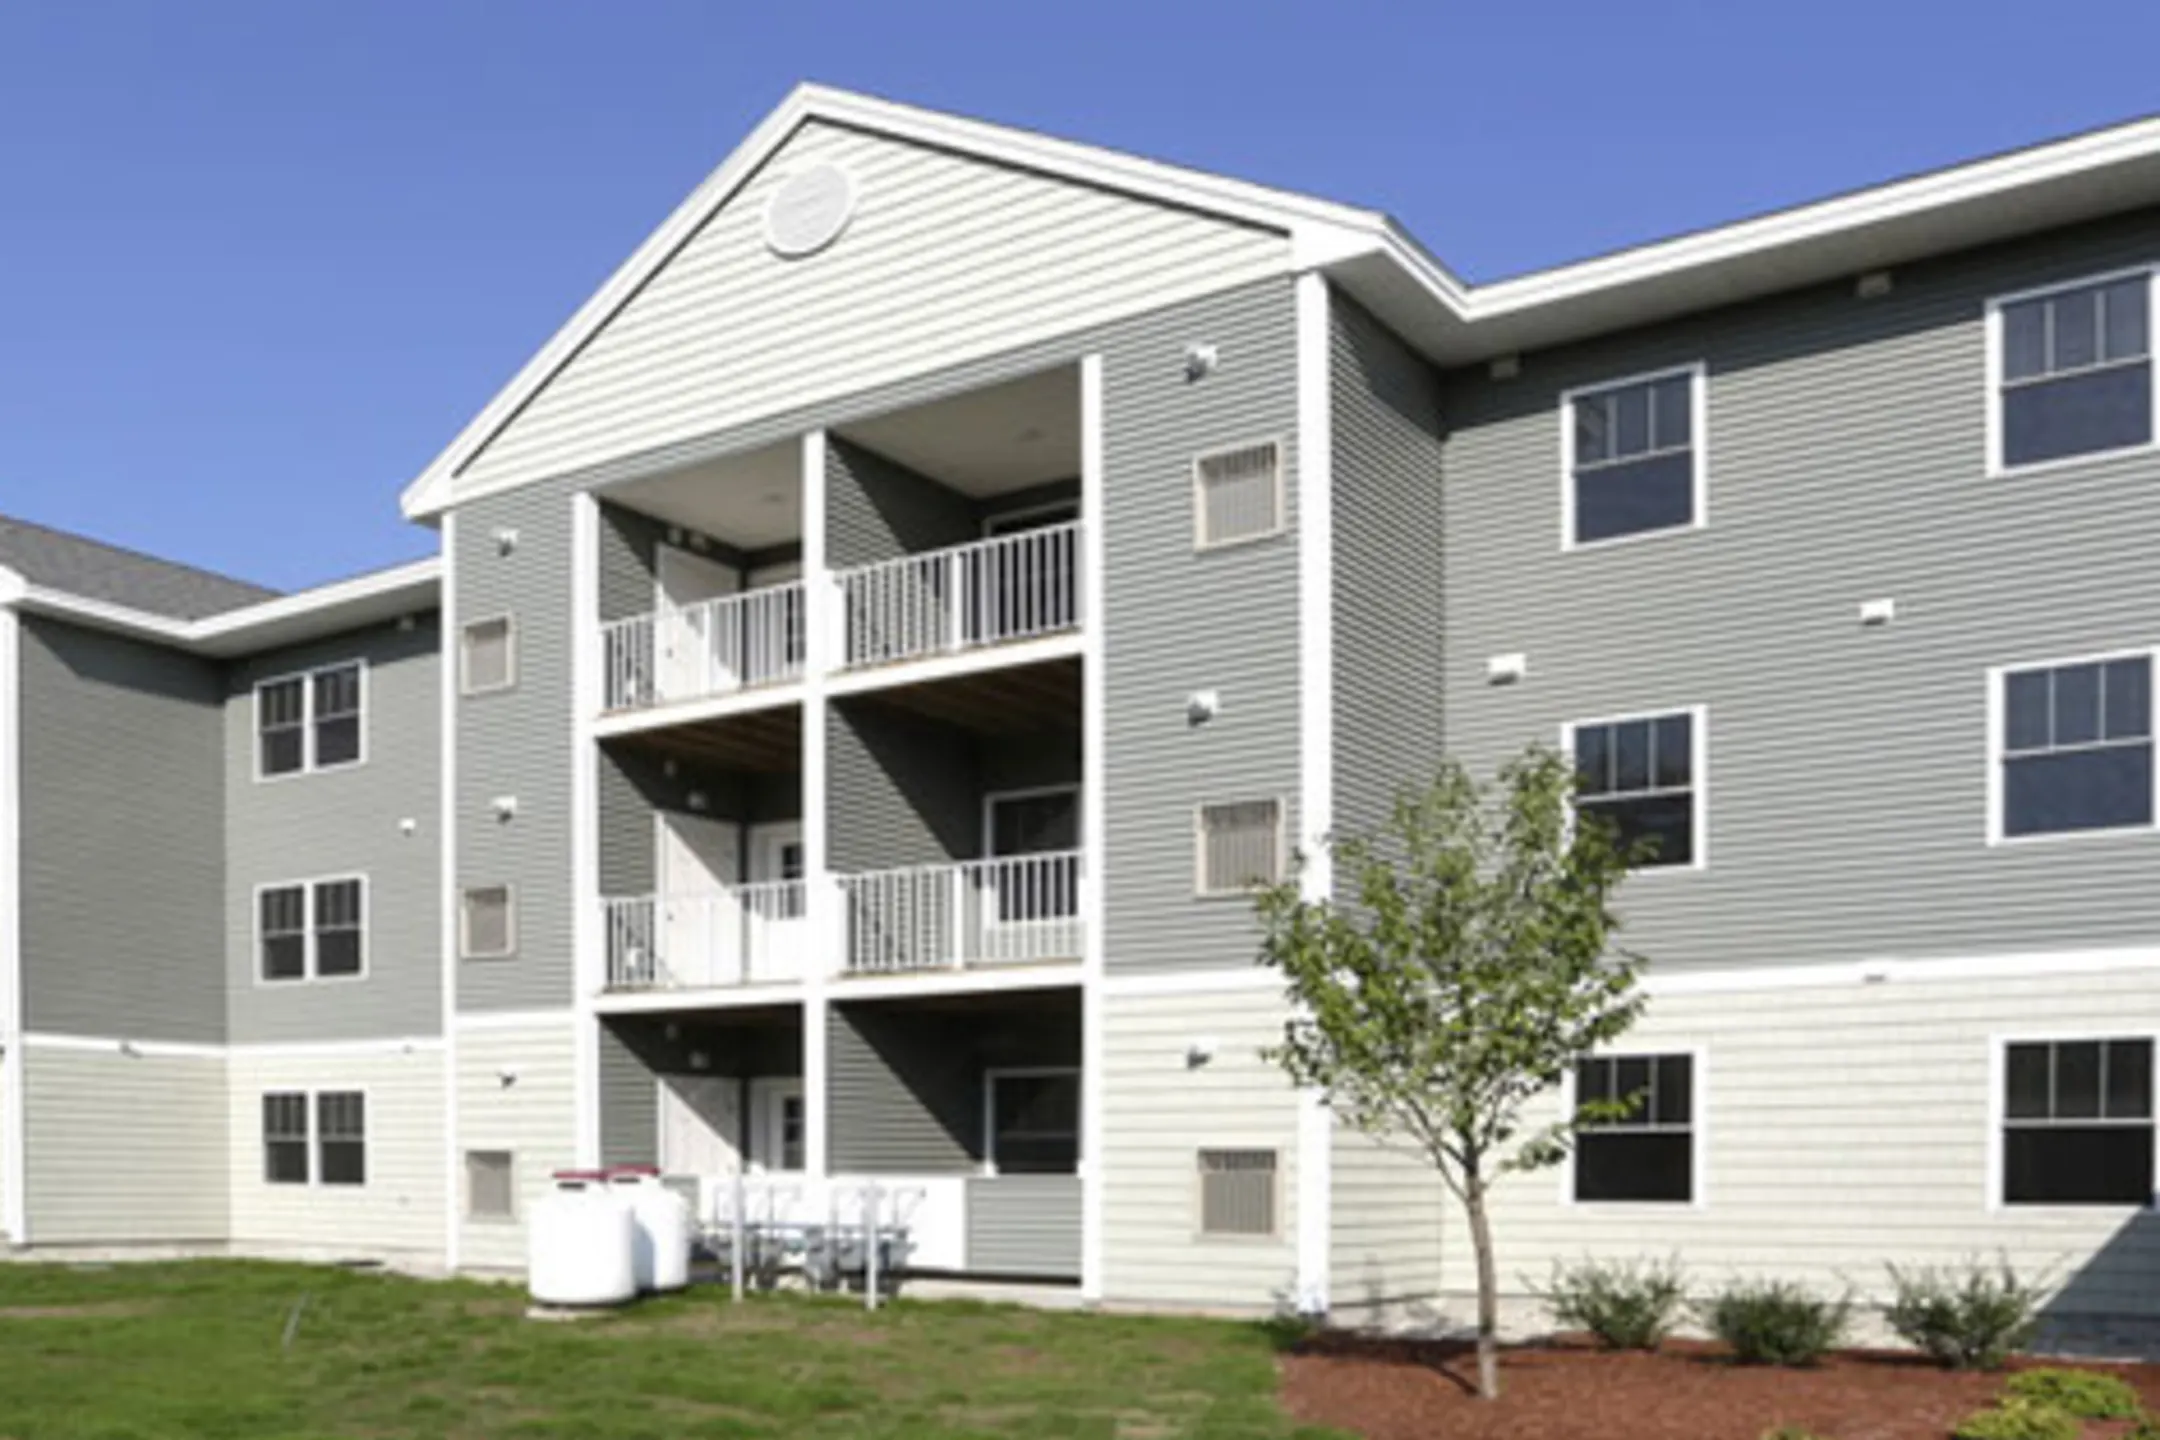 Building - Village At Clark Brook Apartments - Rochester, NH